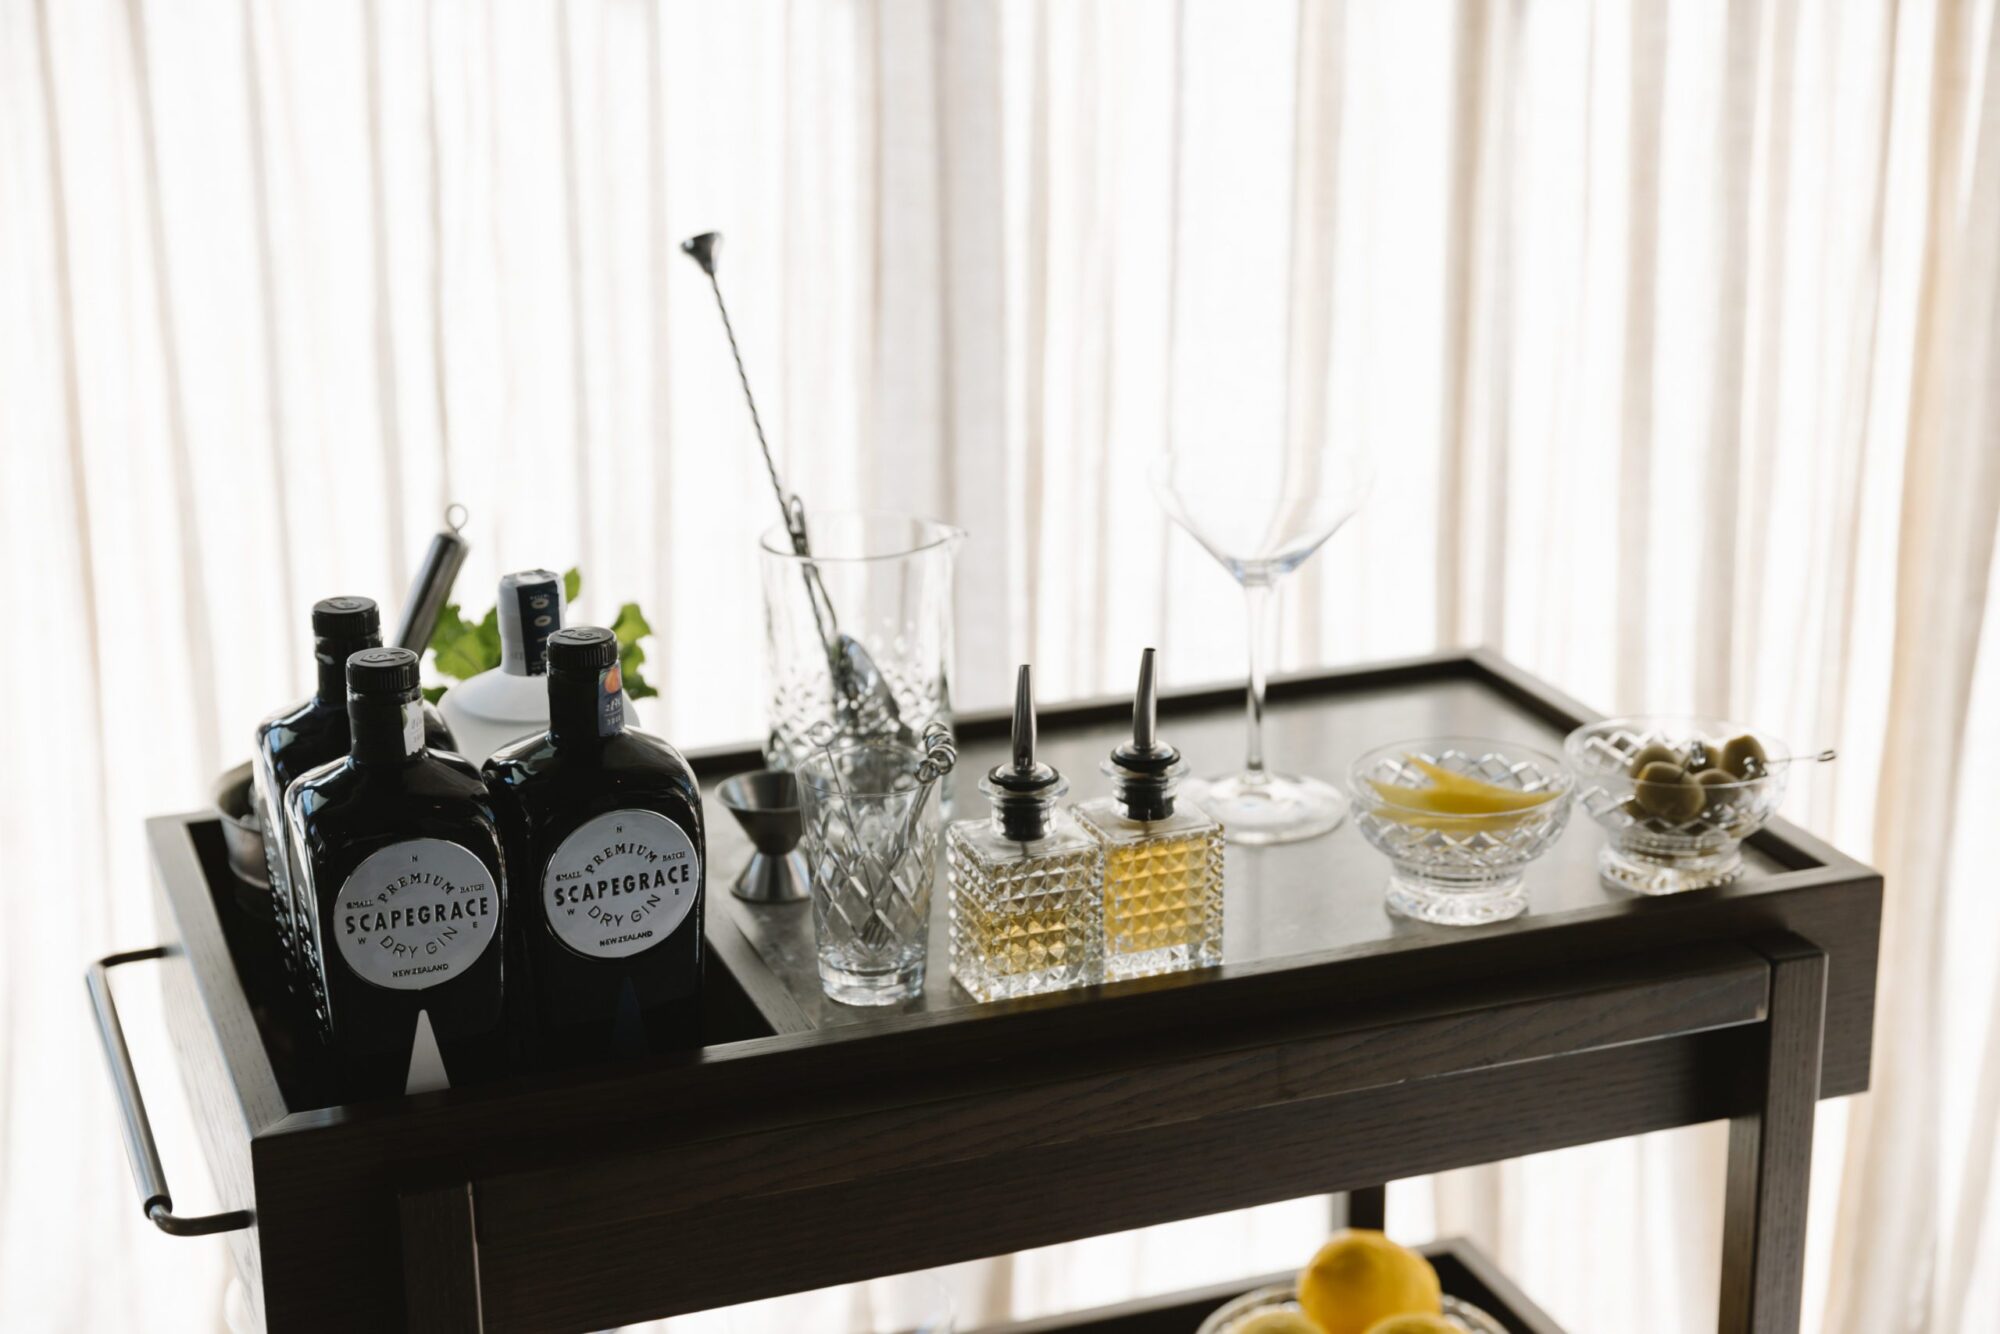 Shaken or stirred? Onslow launches a Scapegrace martini trolley for summer